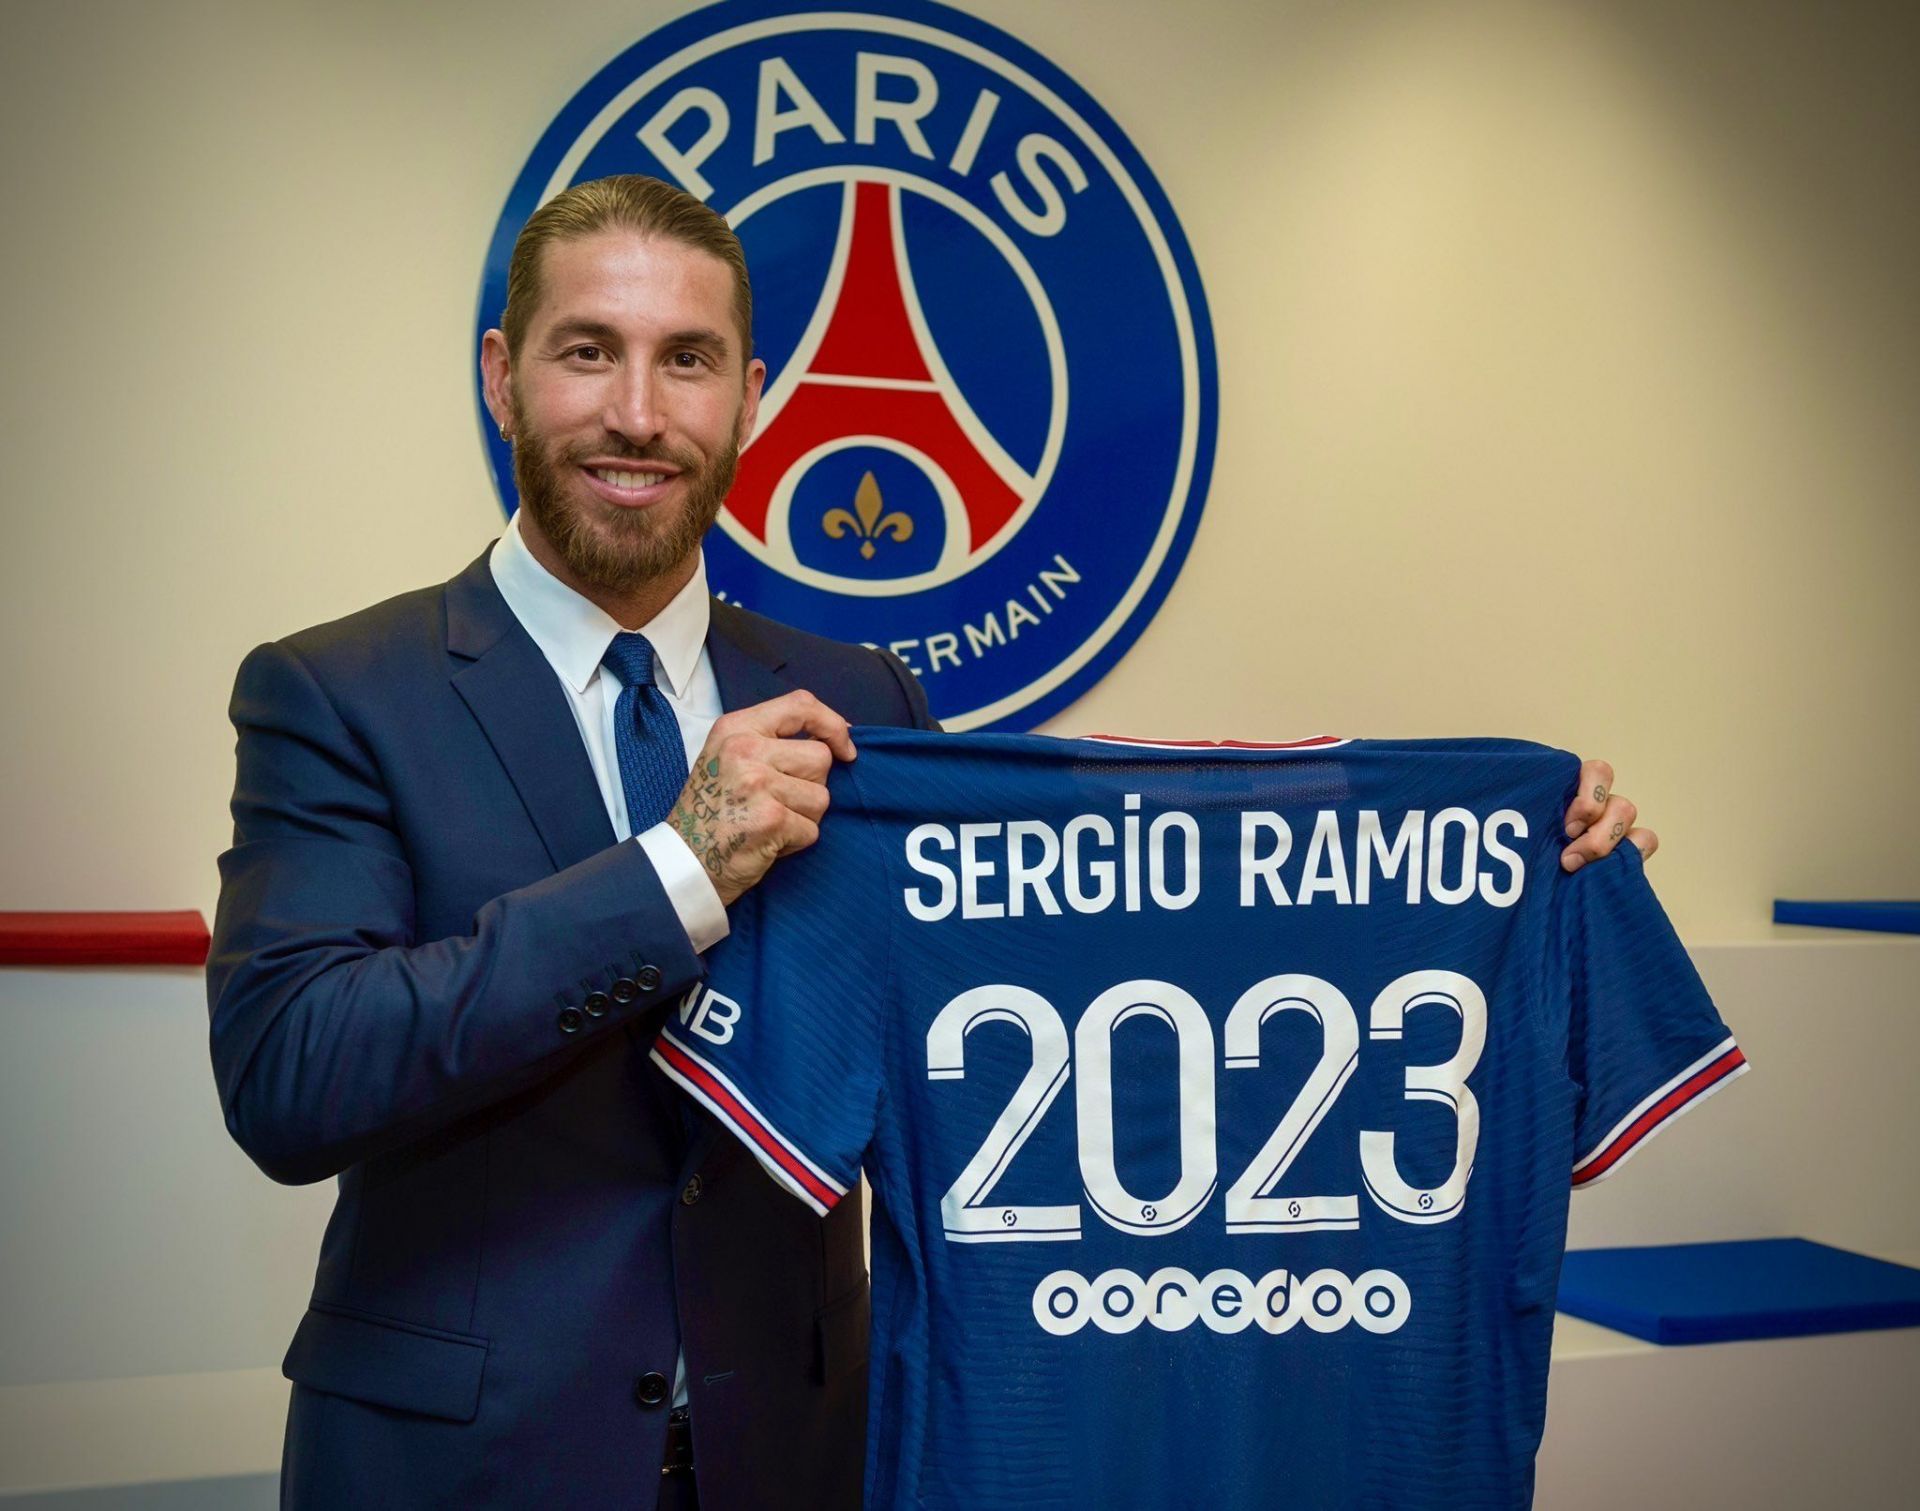 PSG signed the Spanish centre-back Sergio Ramos on a free this summer